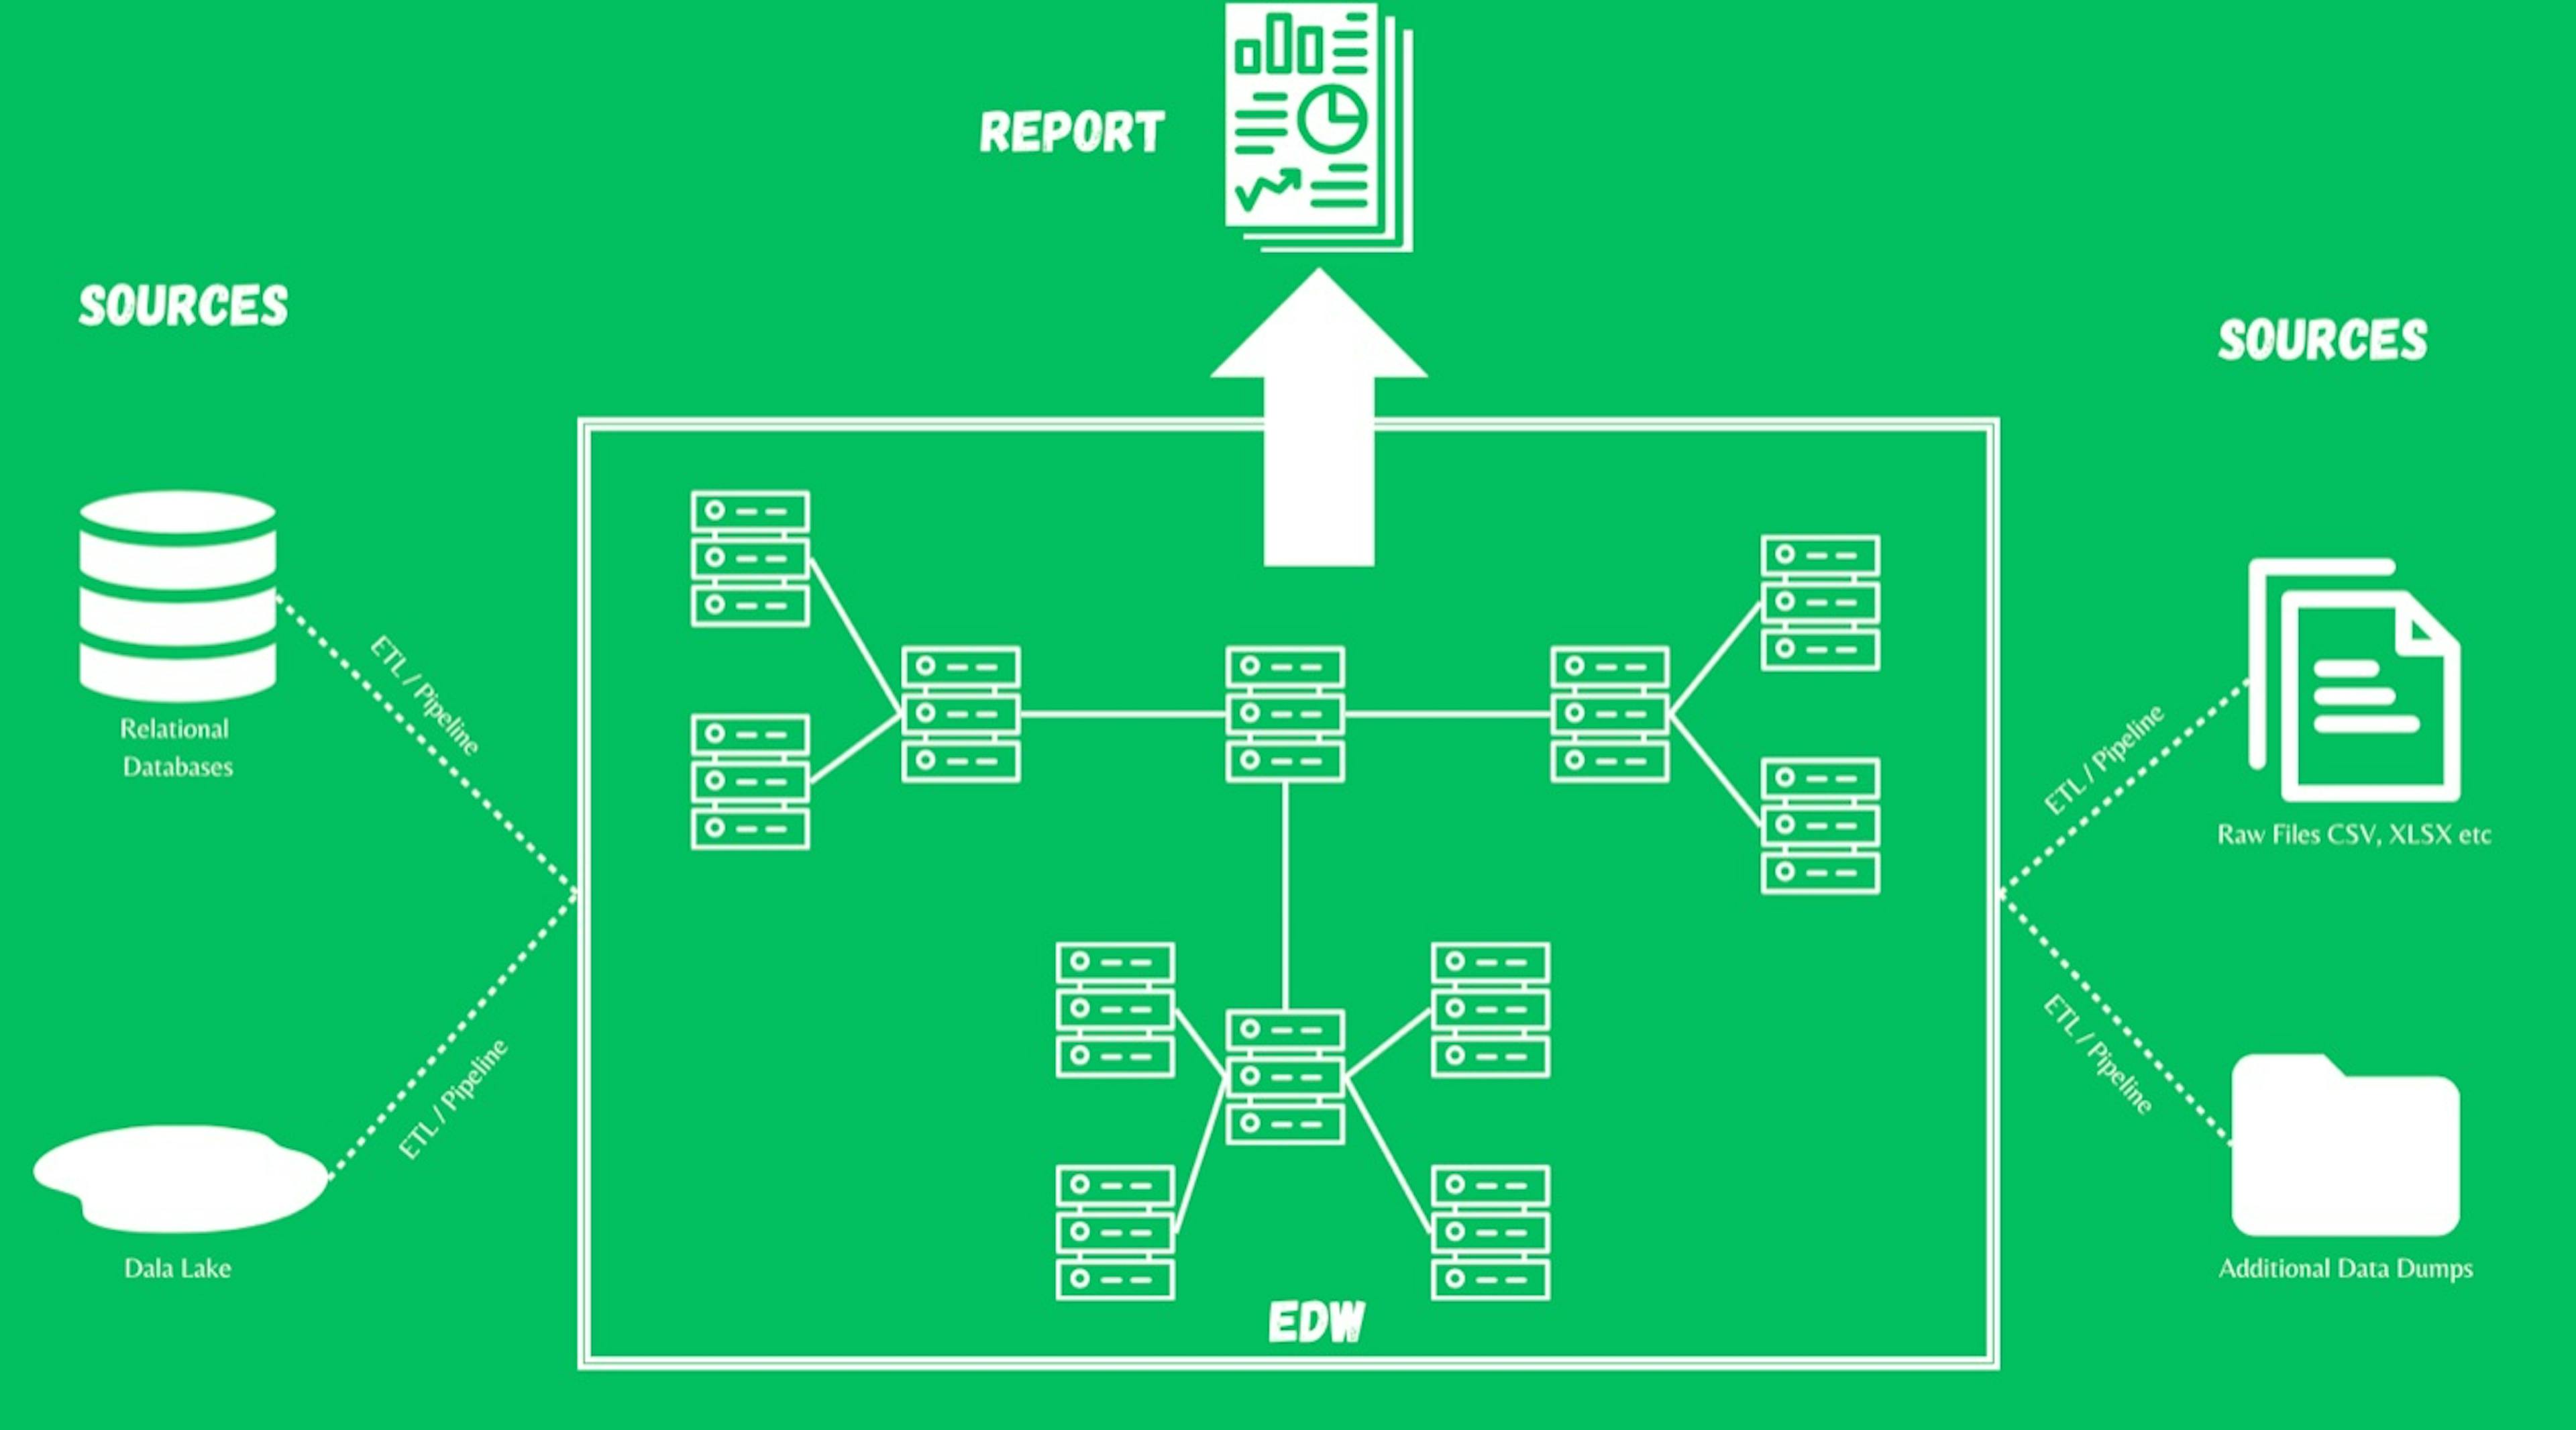 Example of Back-End Architecture of BI Report